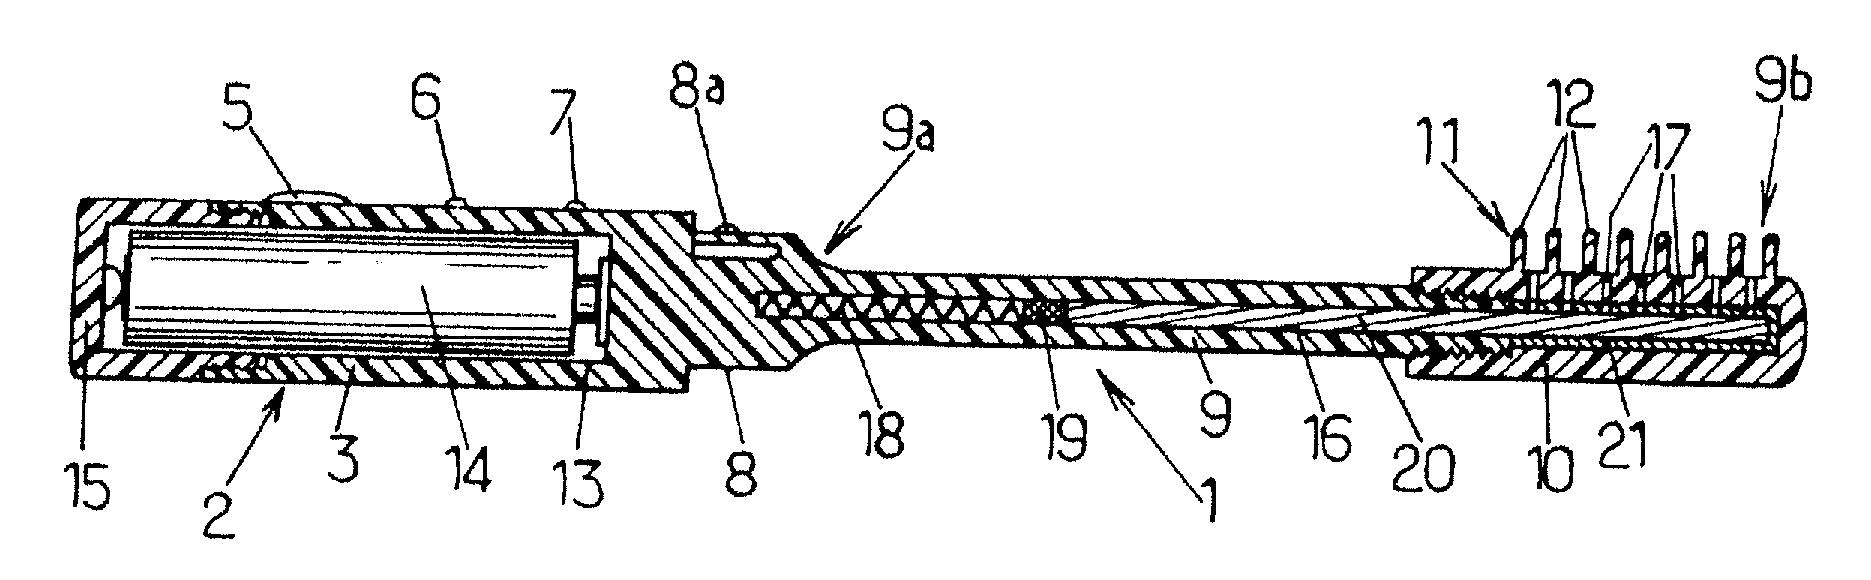 Applicator device for applying a cosmetic and the use of such a device